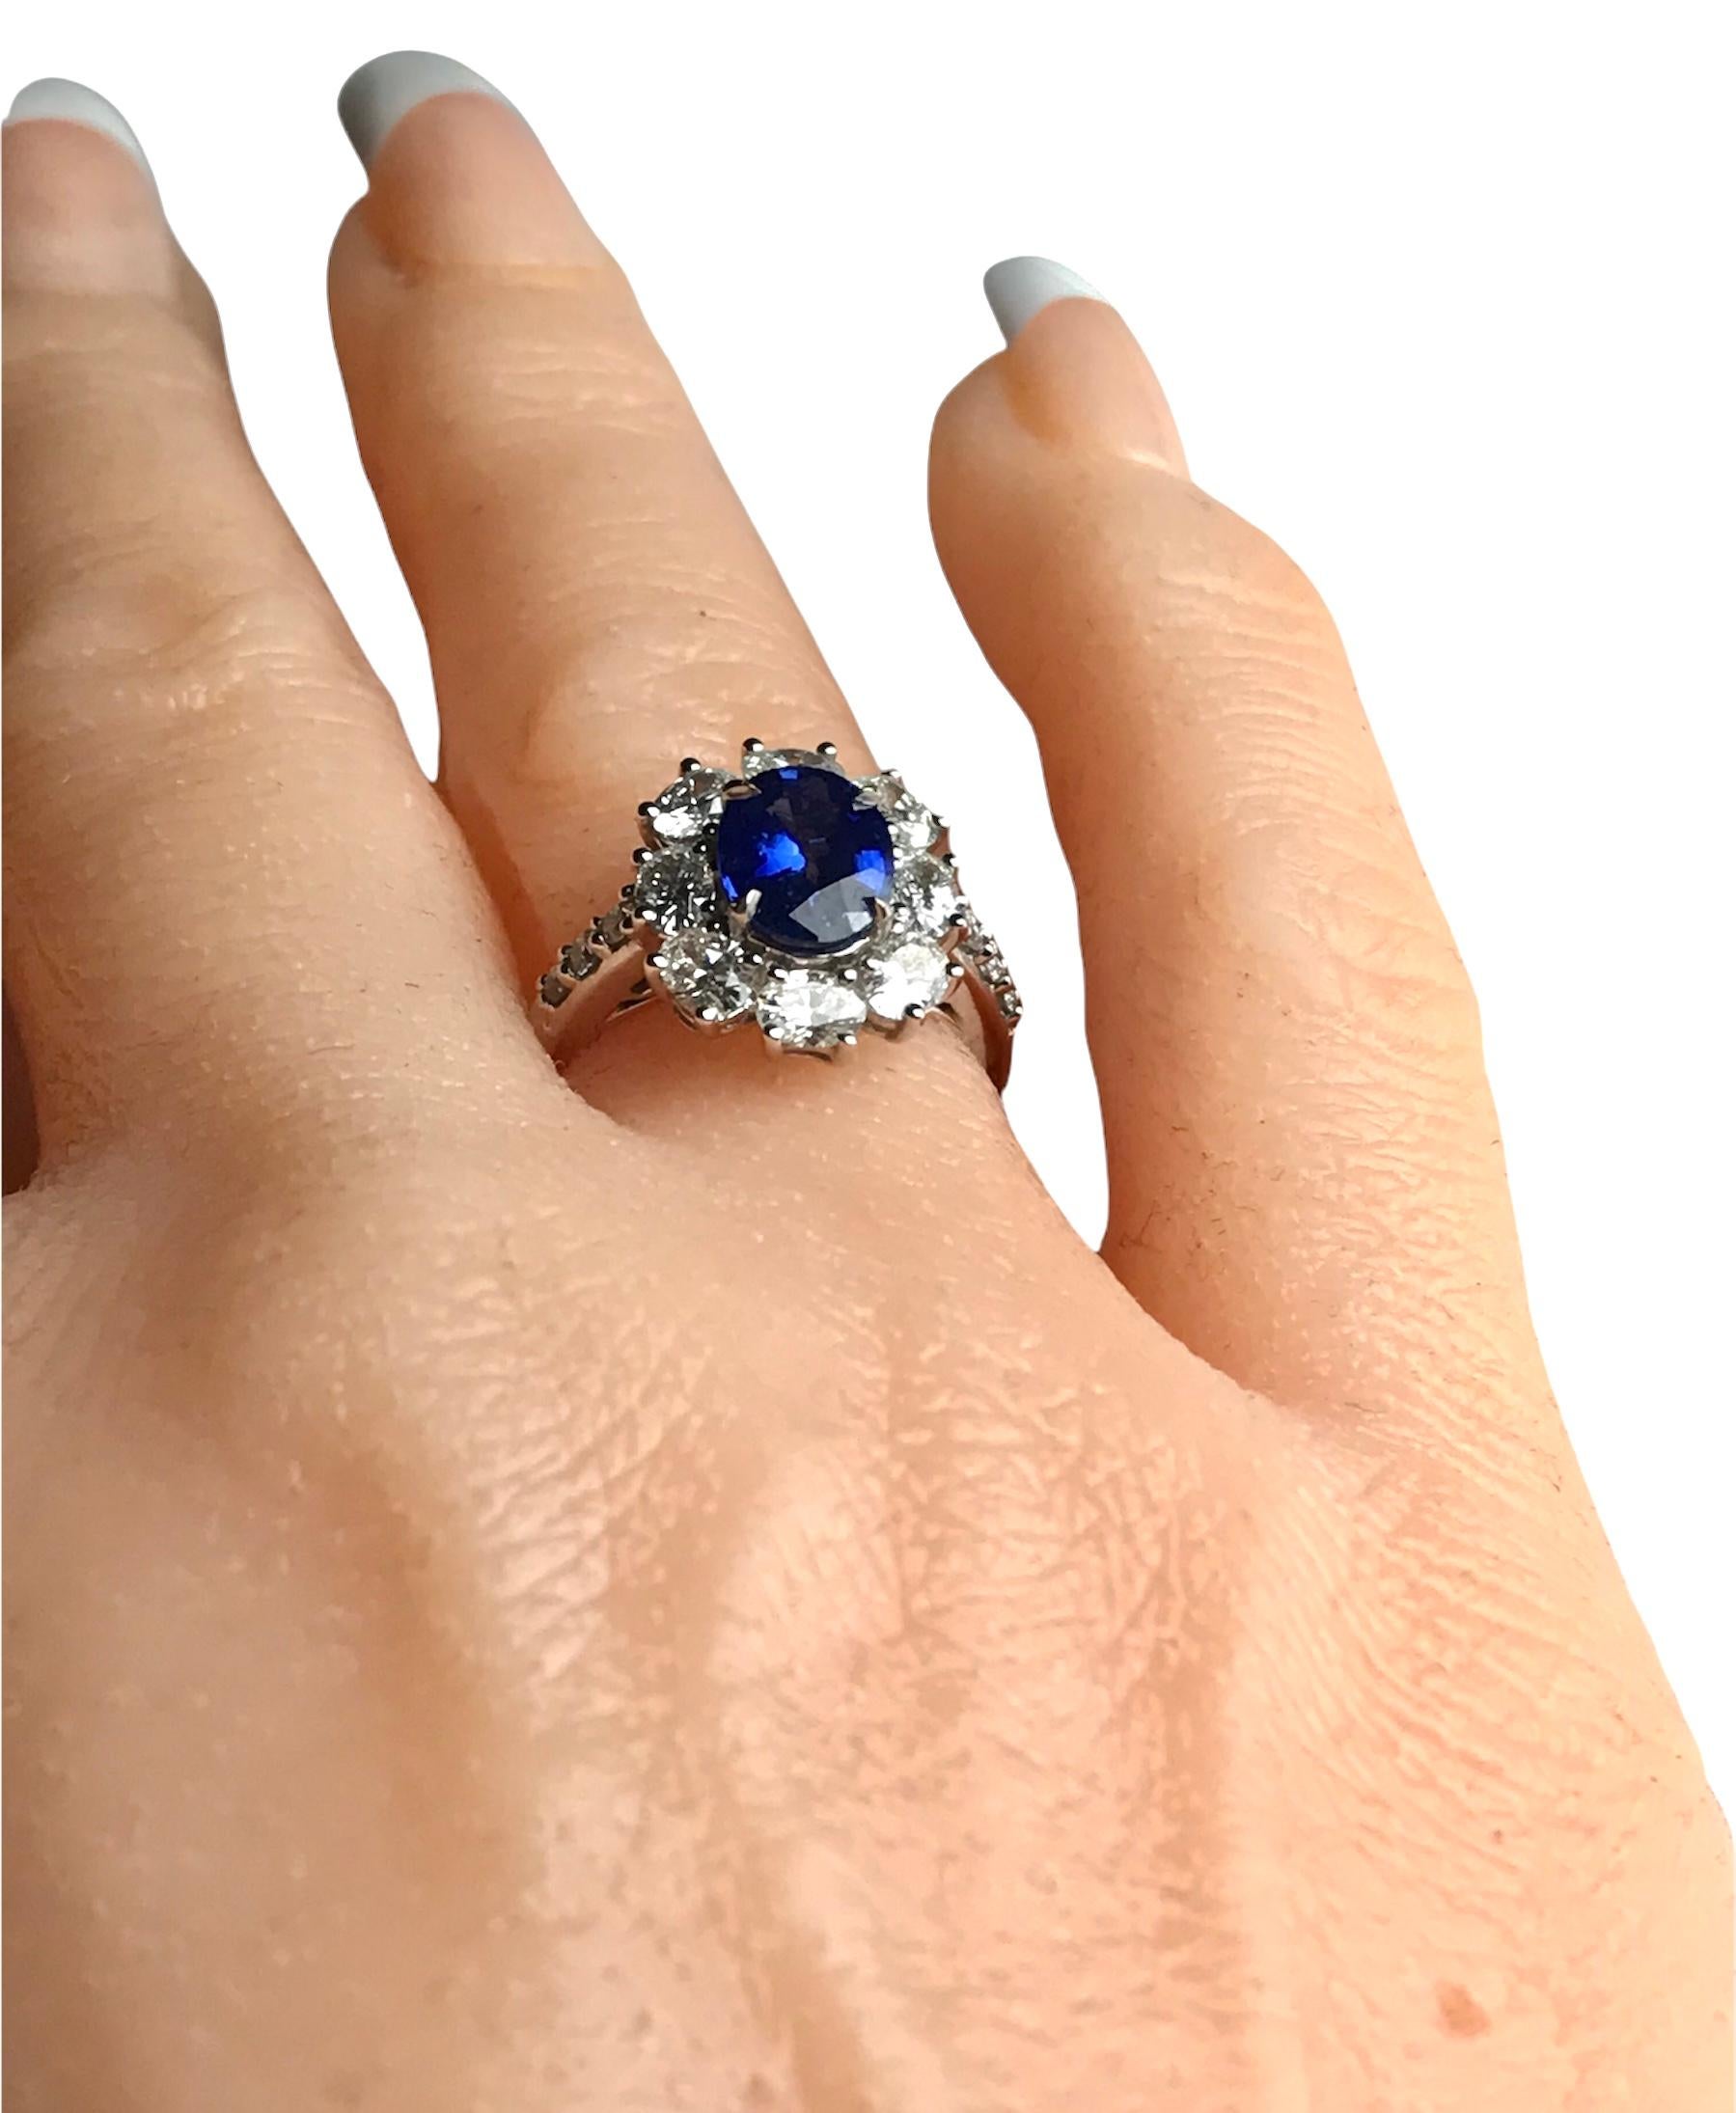 Women's 1.89 Ct Oval Cut Ceylon Sapphire Ring with 1.53 Carat Diamond Halo in 18k ref334 For Sale